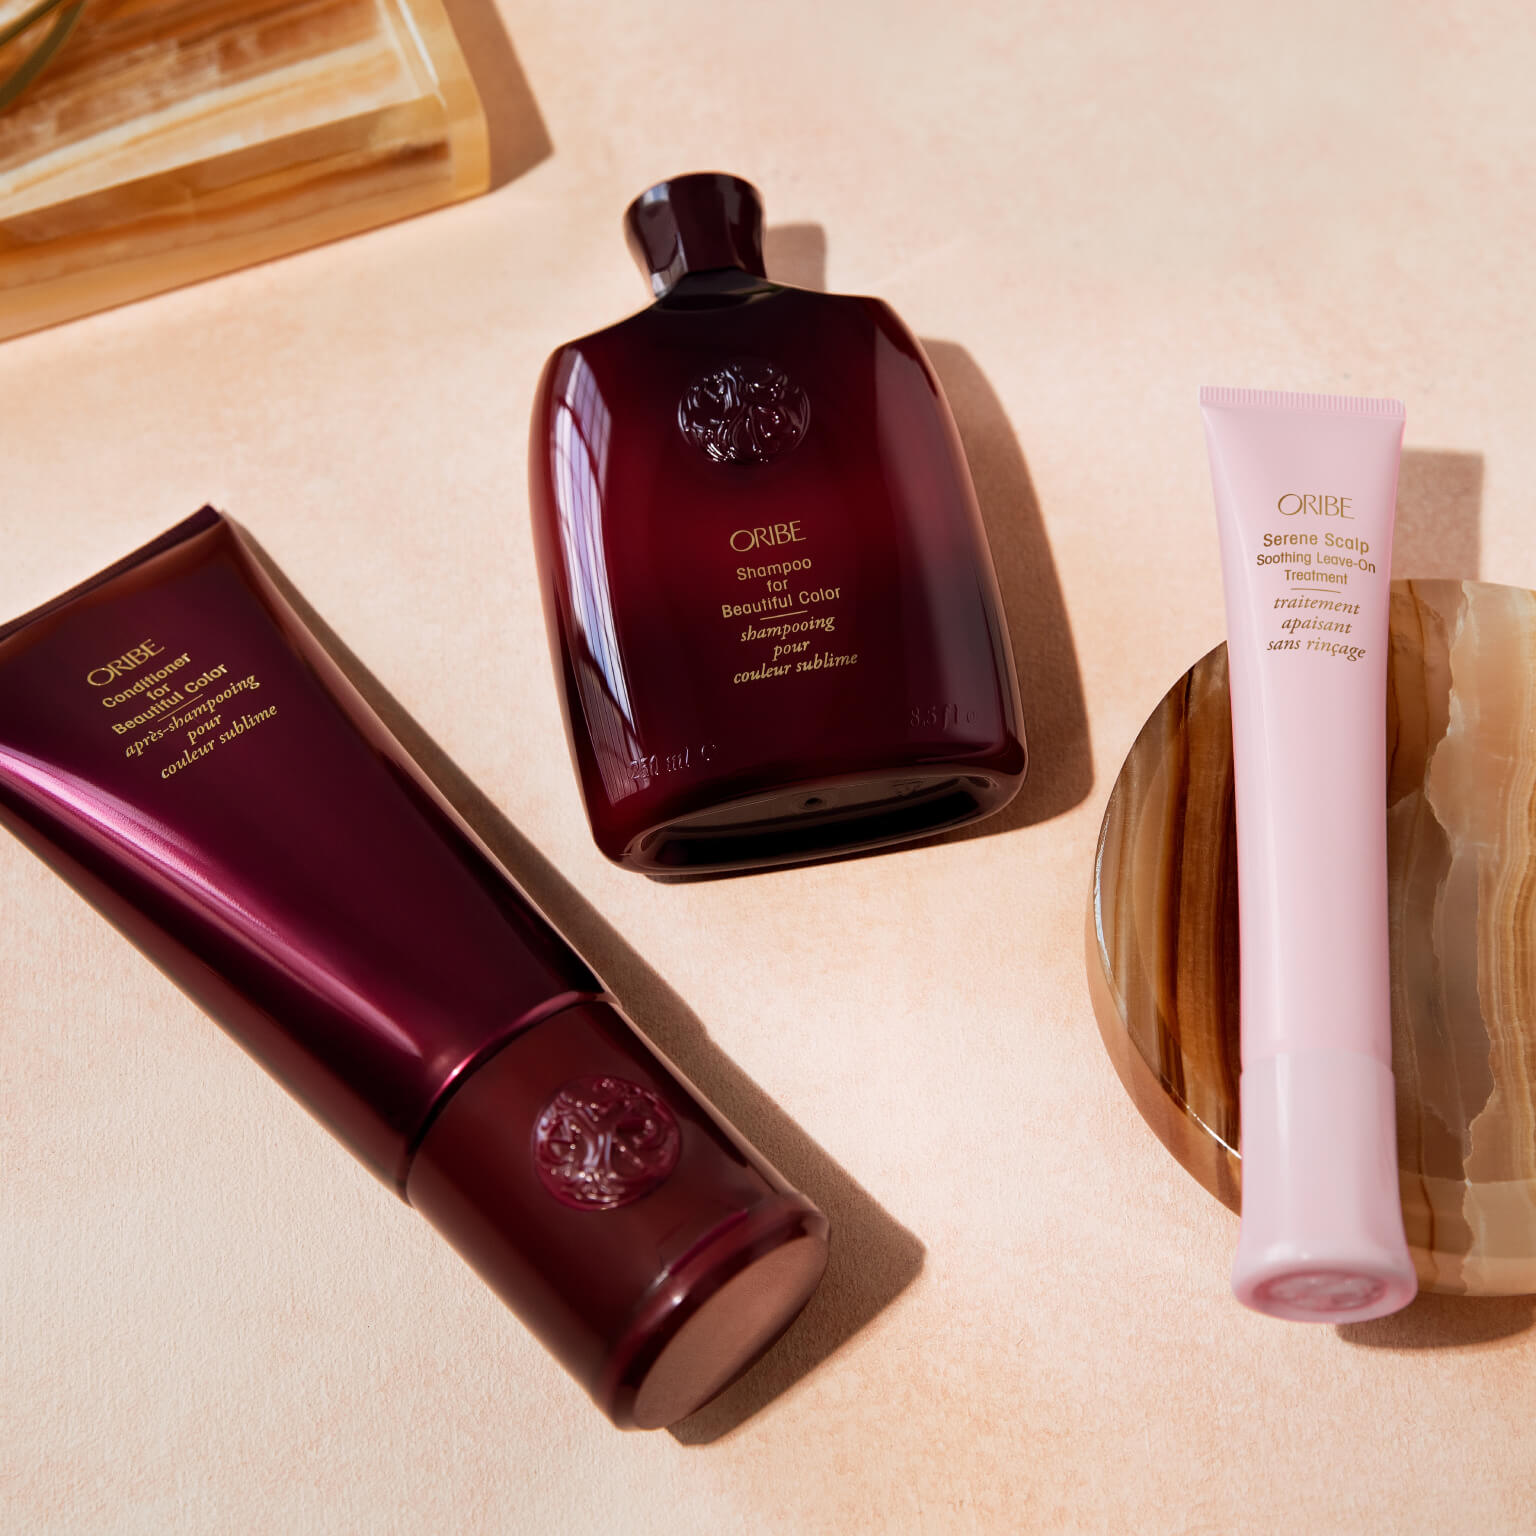 Oribe Review #3: Oribe Shampoo for Beautiful Color